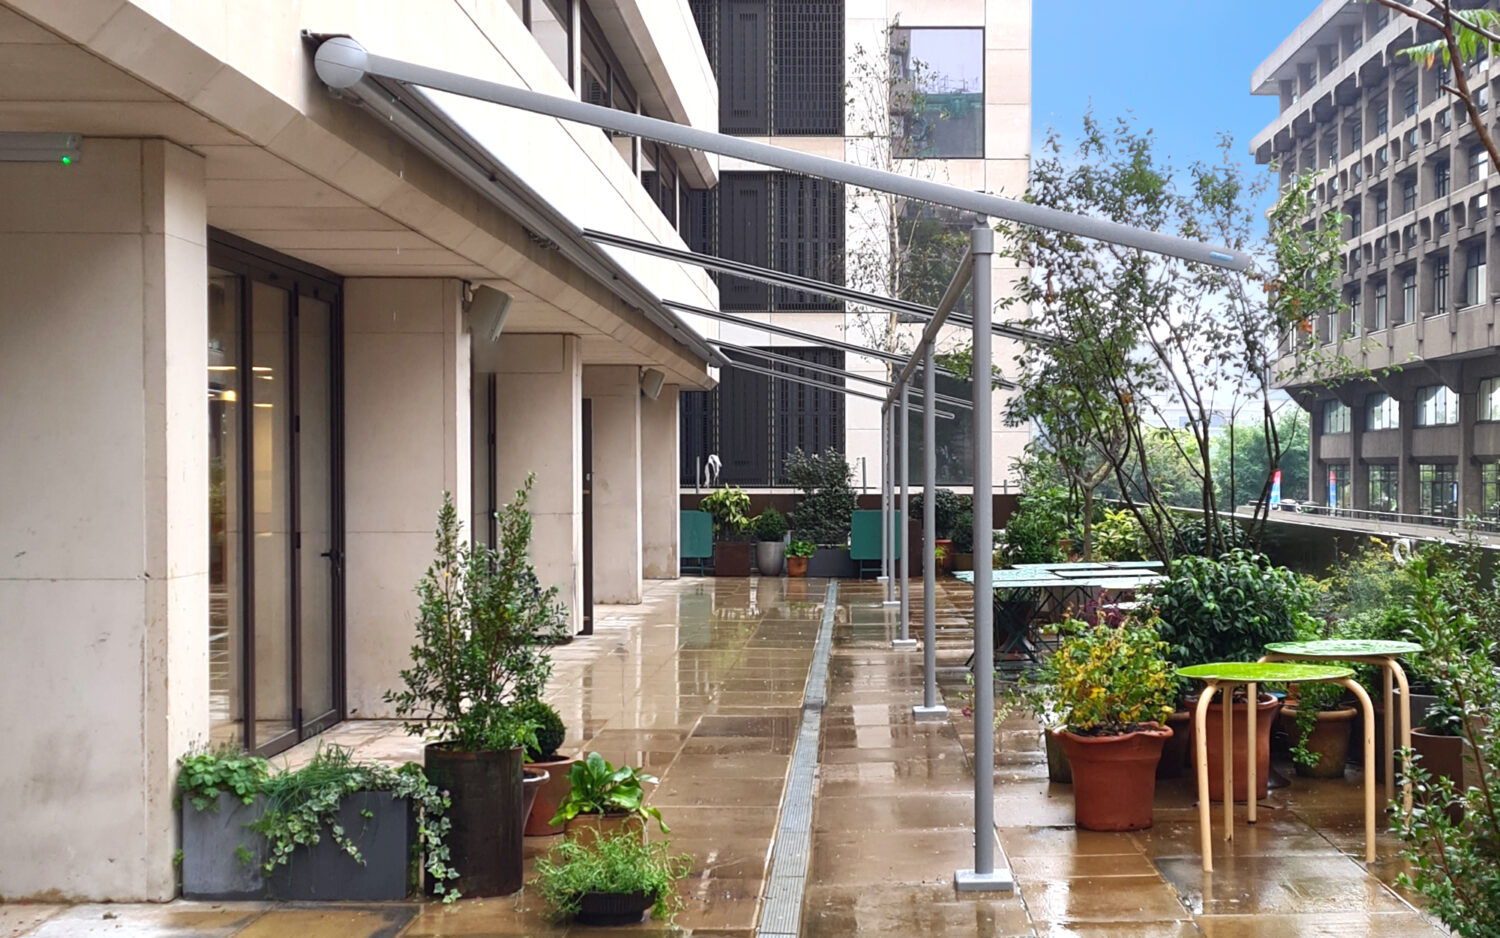 Terrace Awnings and Canopies in London